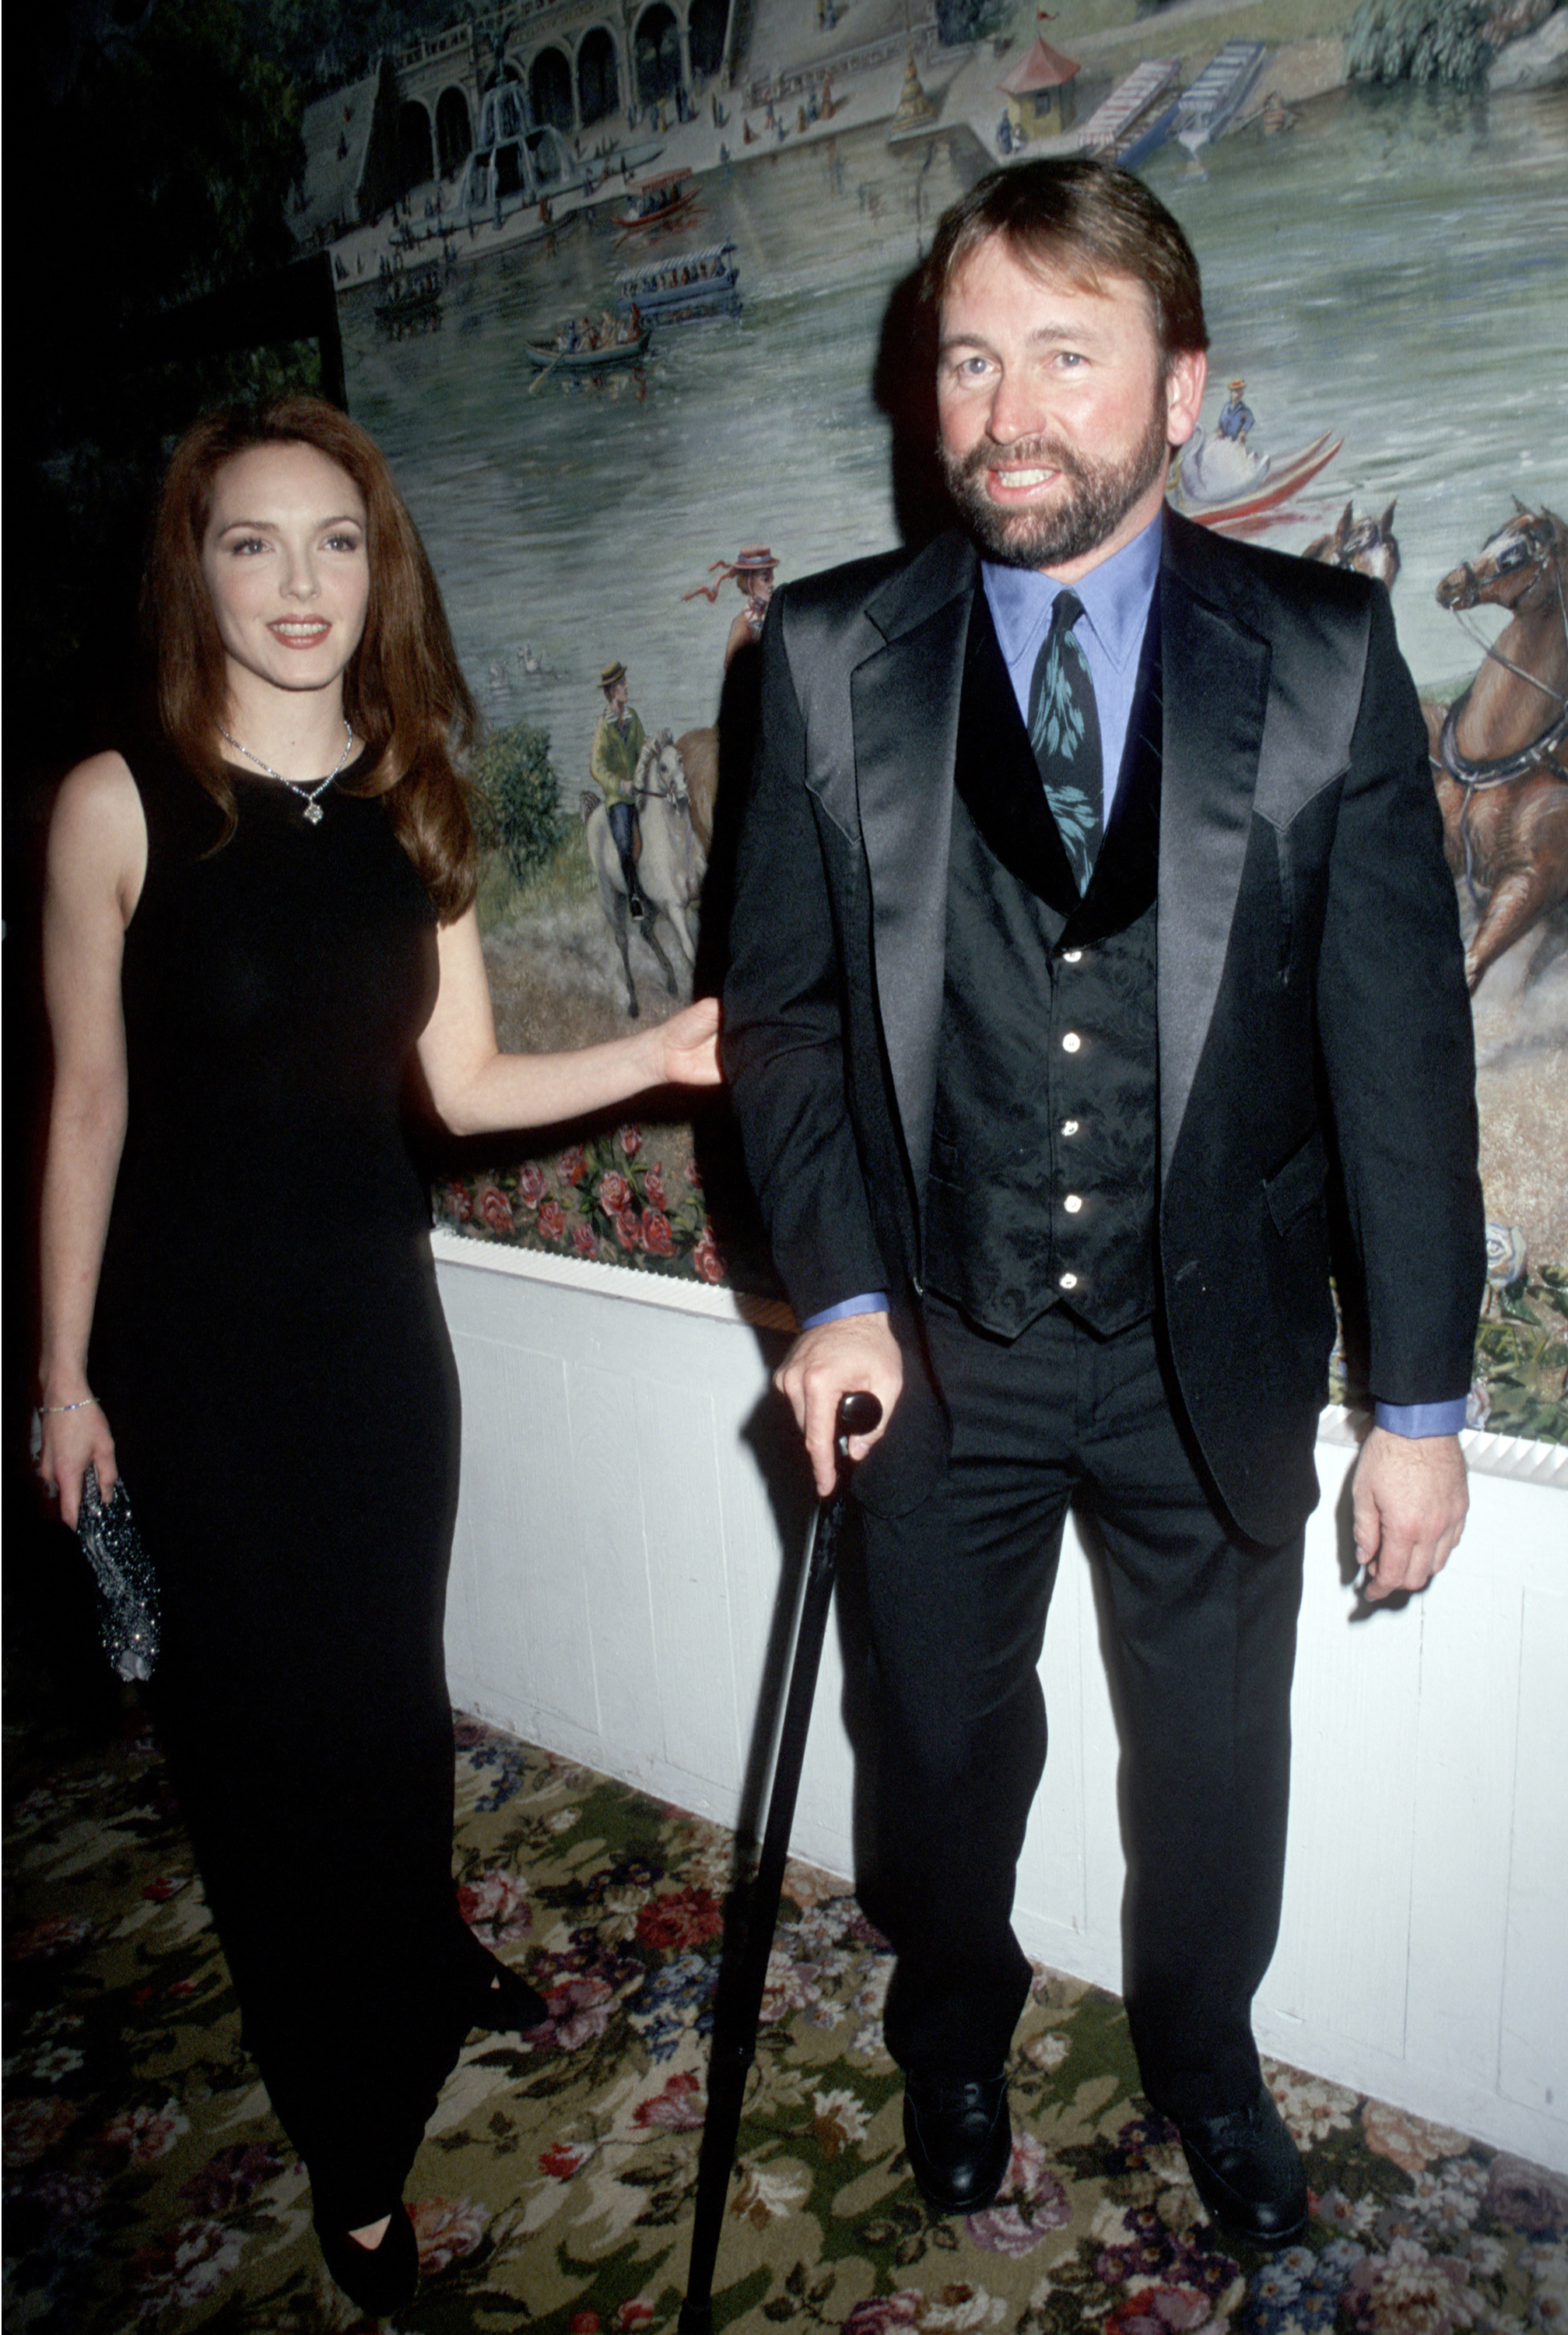 Amy Yasbeck and John Ritter during National Board of Review Annual Gala at Tavern on the Green in New York City, United States in 1997 | Source: Getty Images